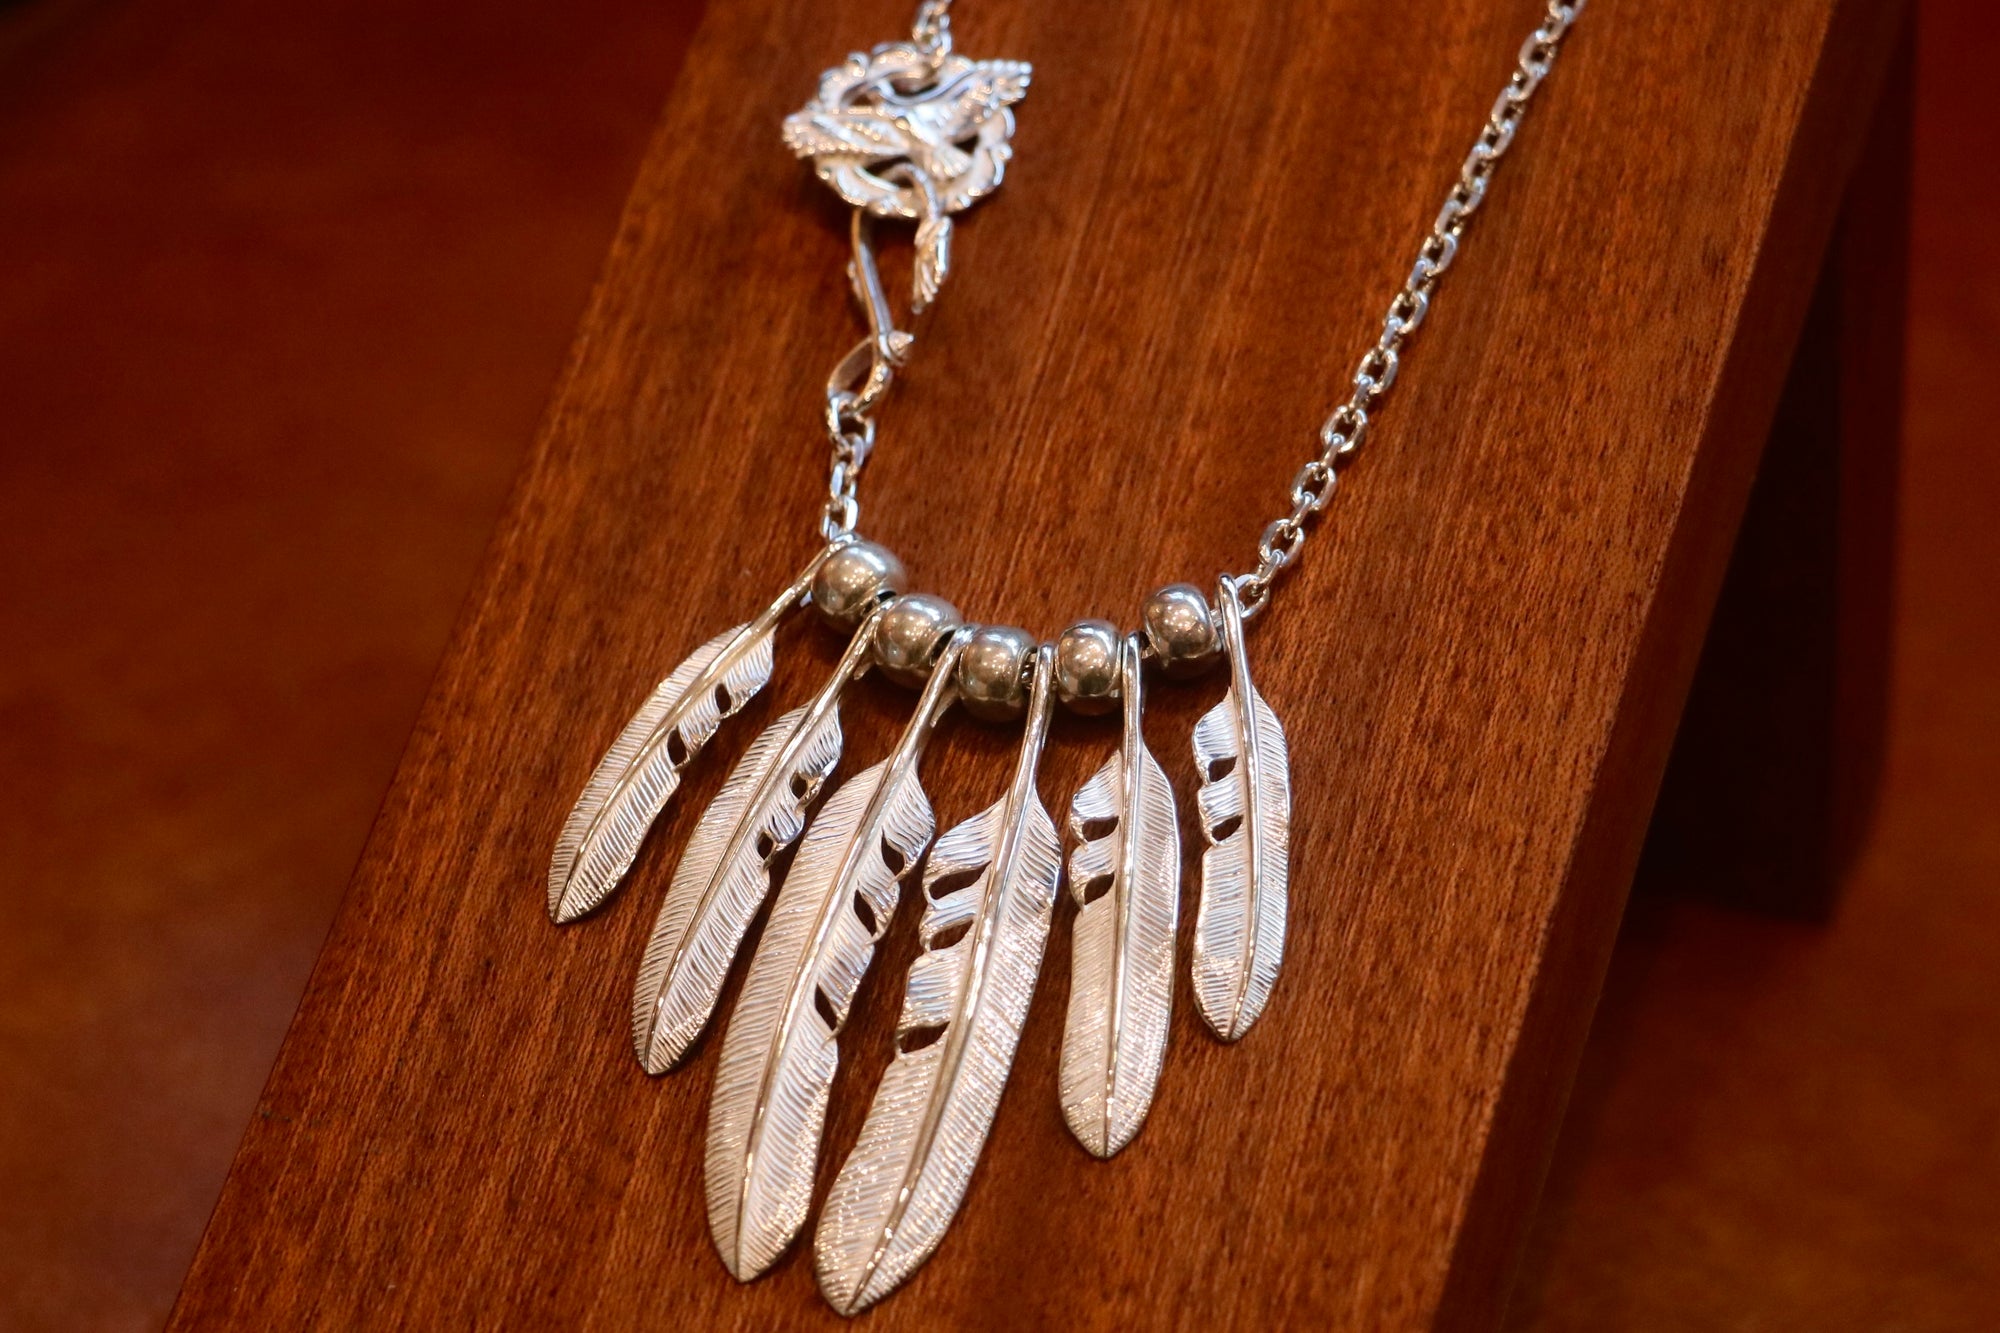 Silver Dollar Craft 925 Silver Feather Pendant S